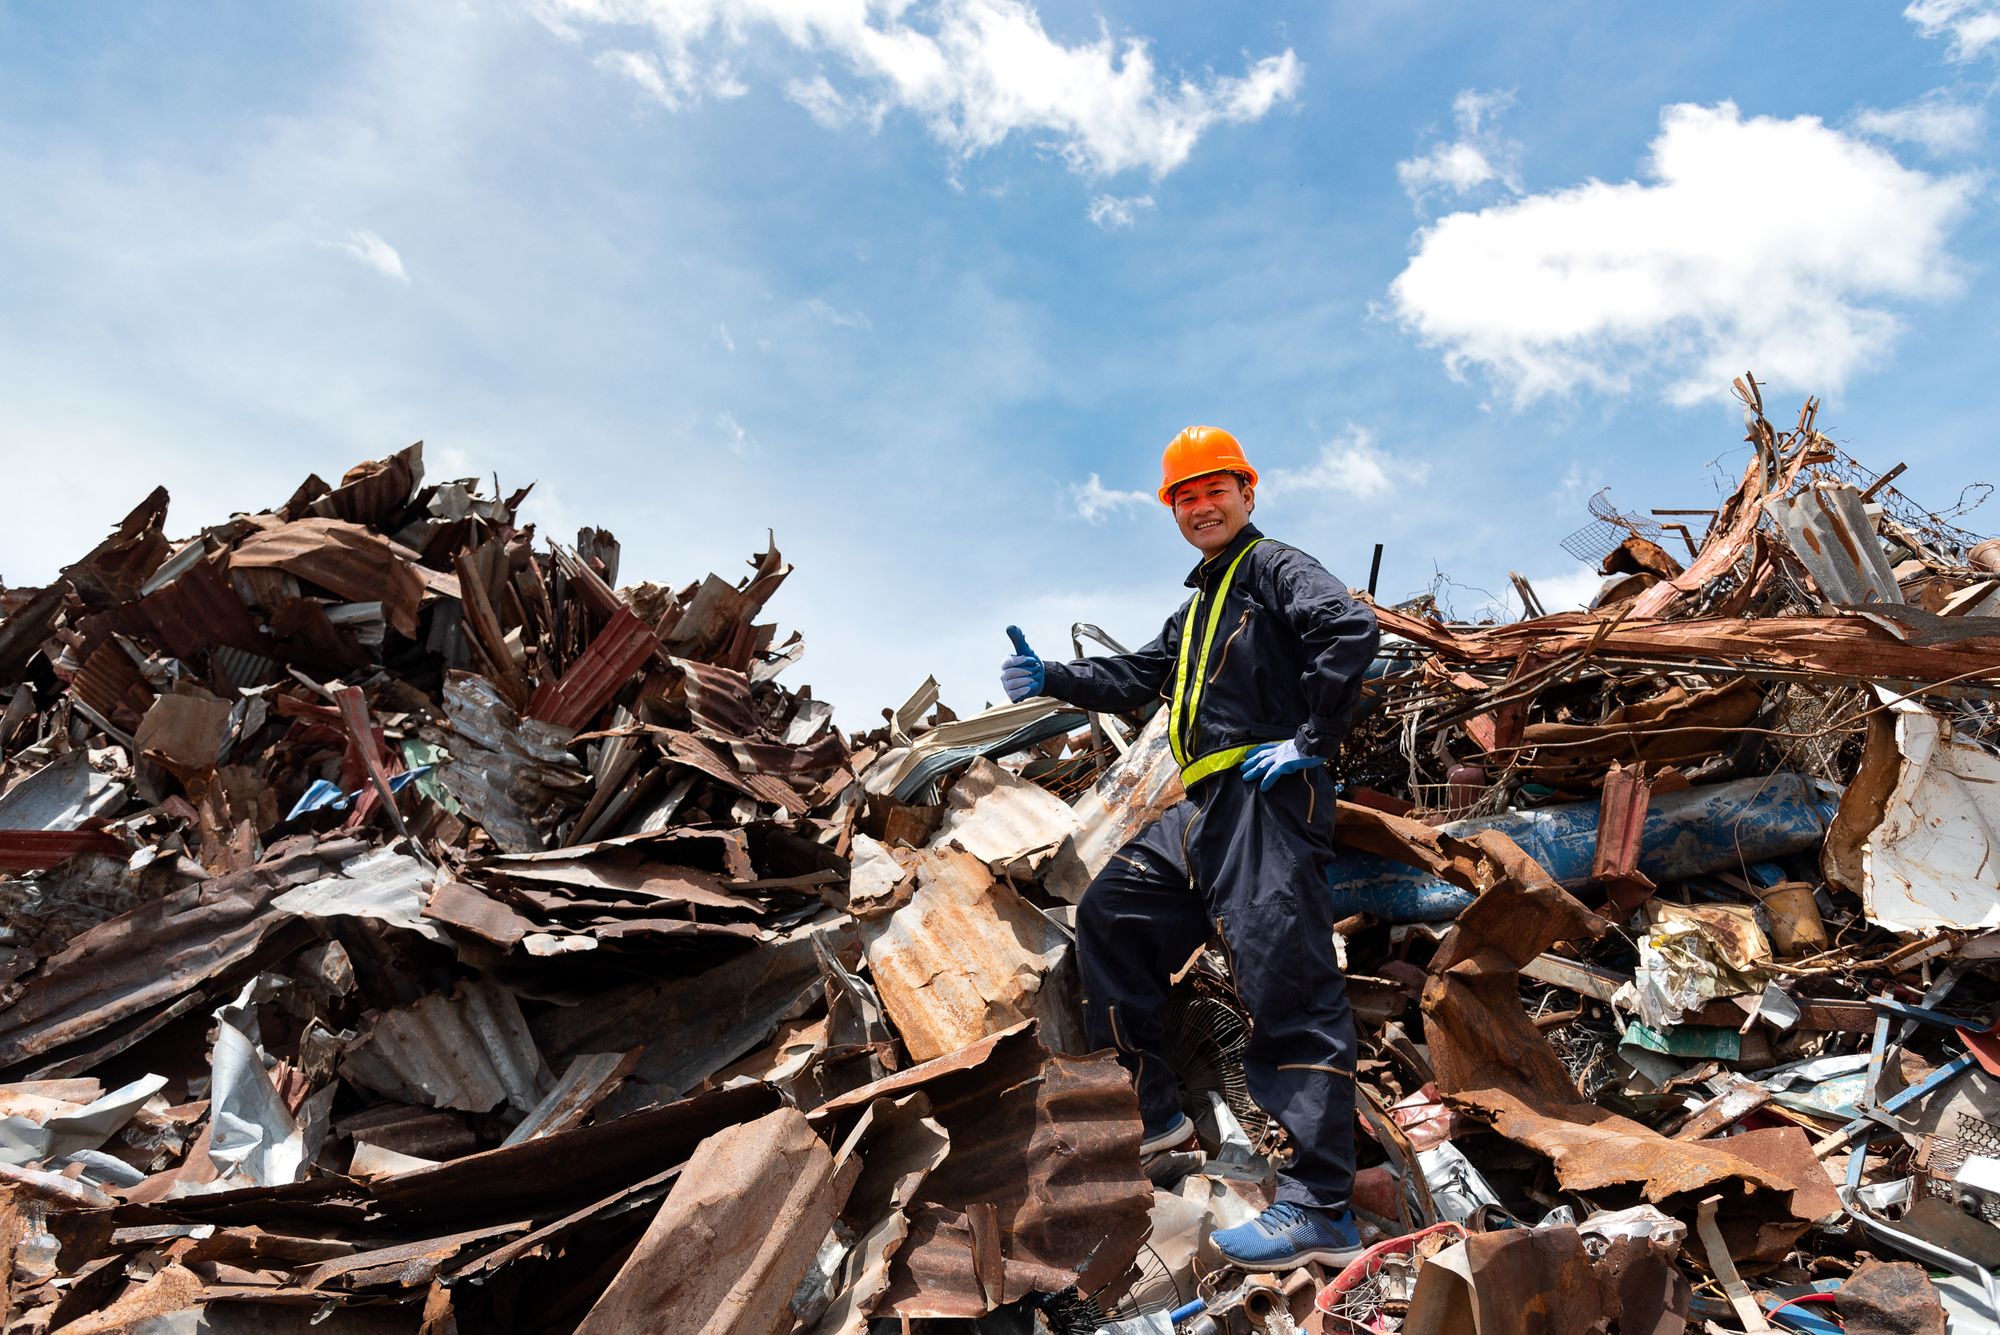 metal recycling Melbourne